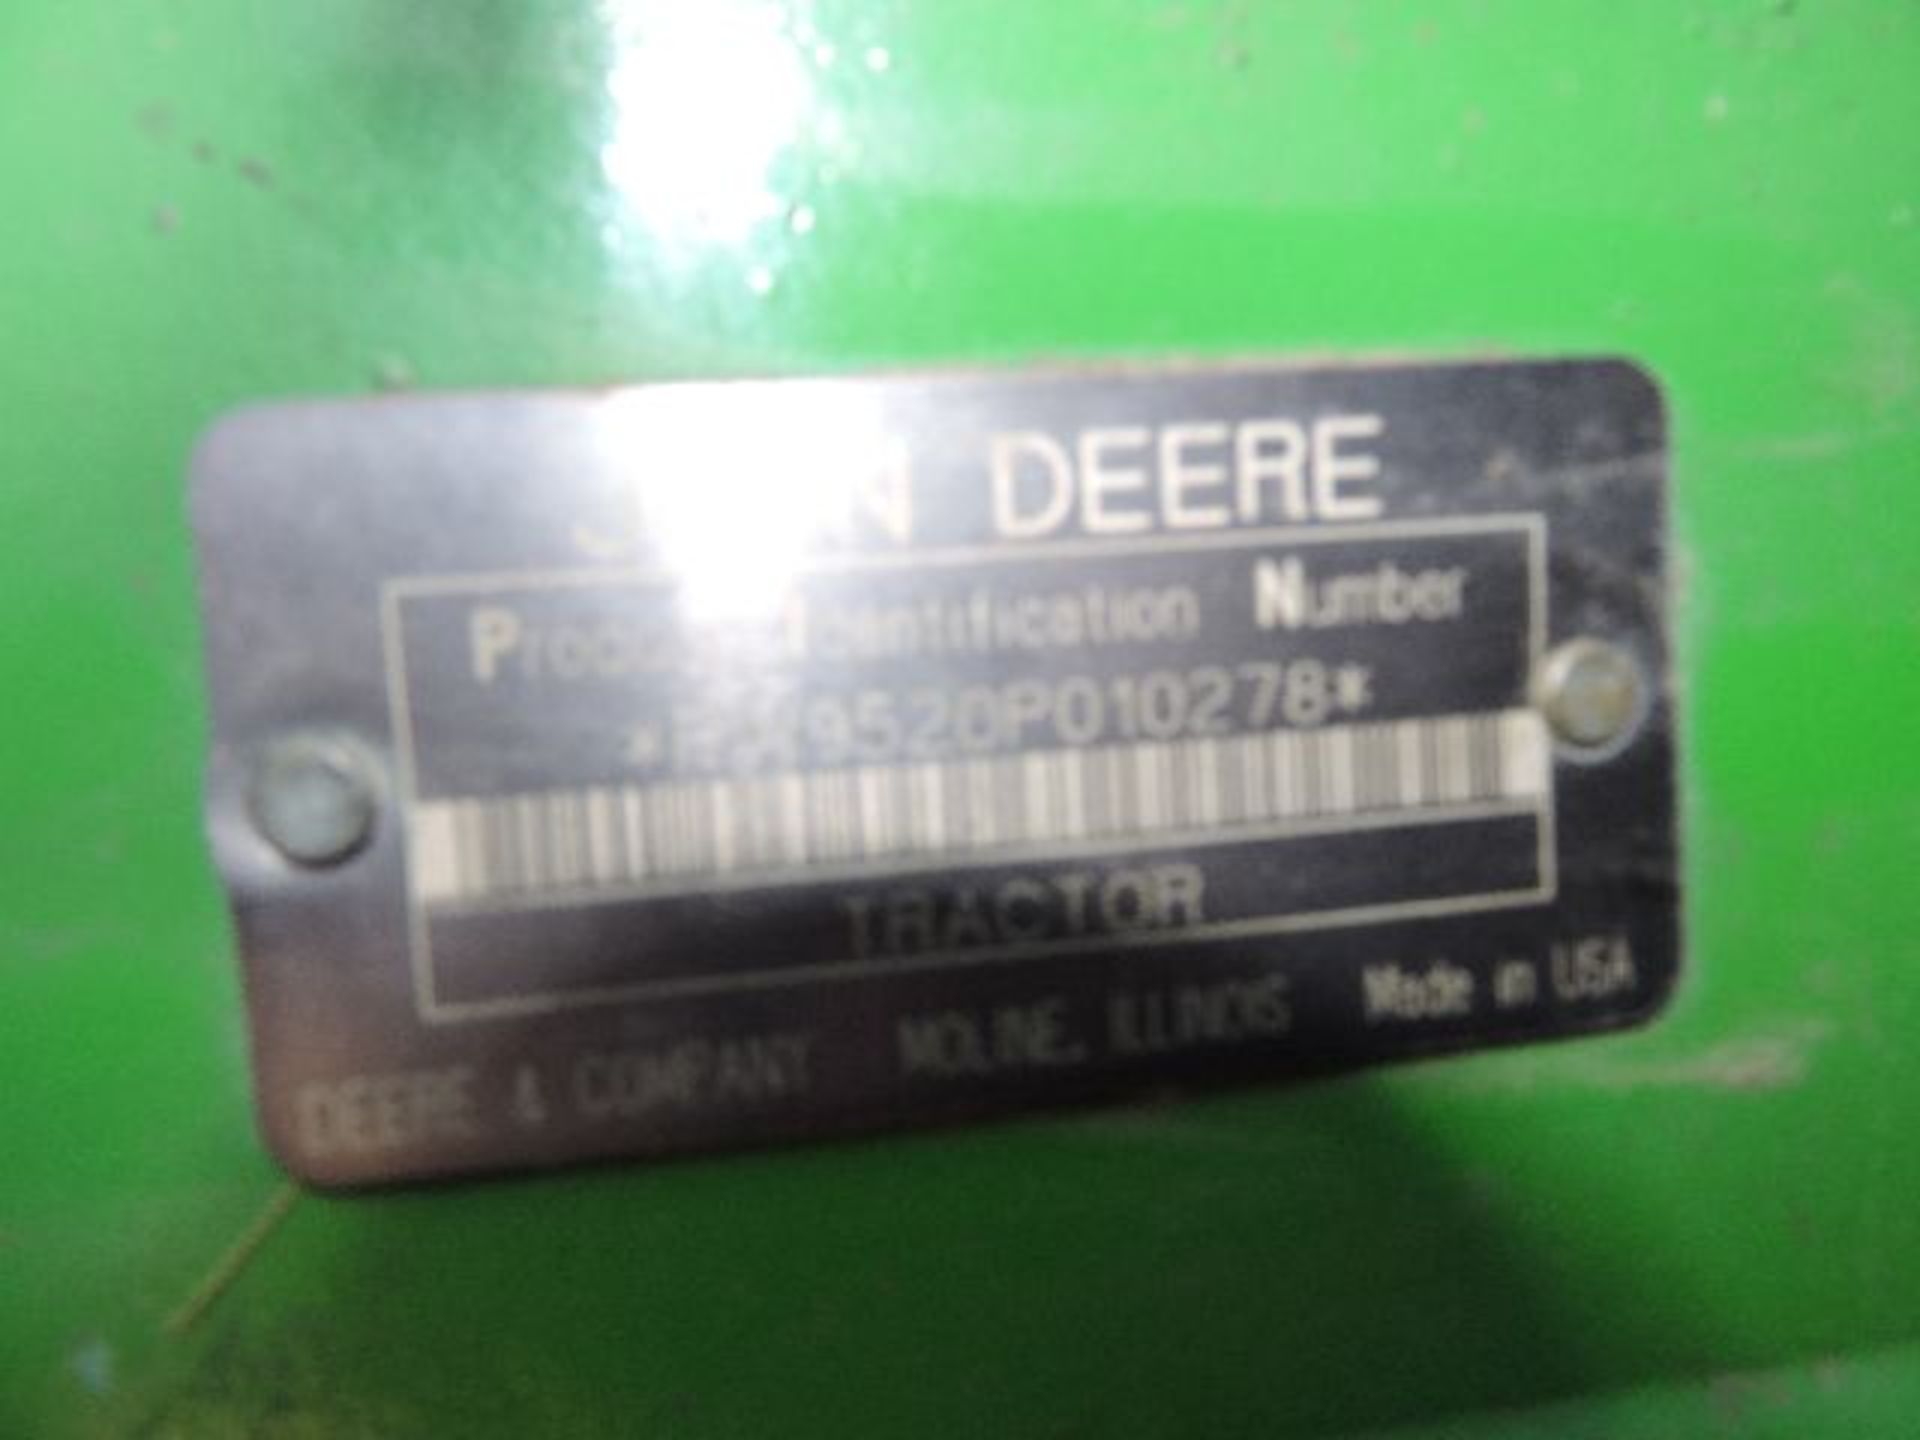 2003 John Deere 9520 articulated tractor, sn RW9520P010278, hrs. on meter 6,592, 4 WD, (8) New - Image 11 of 14